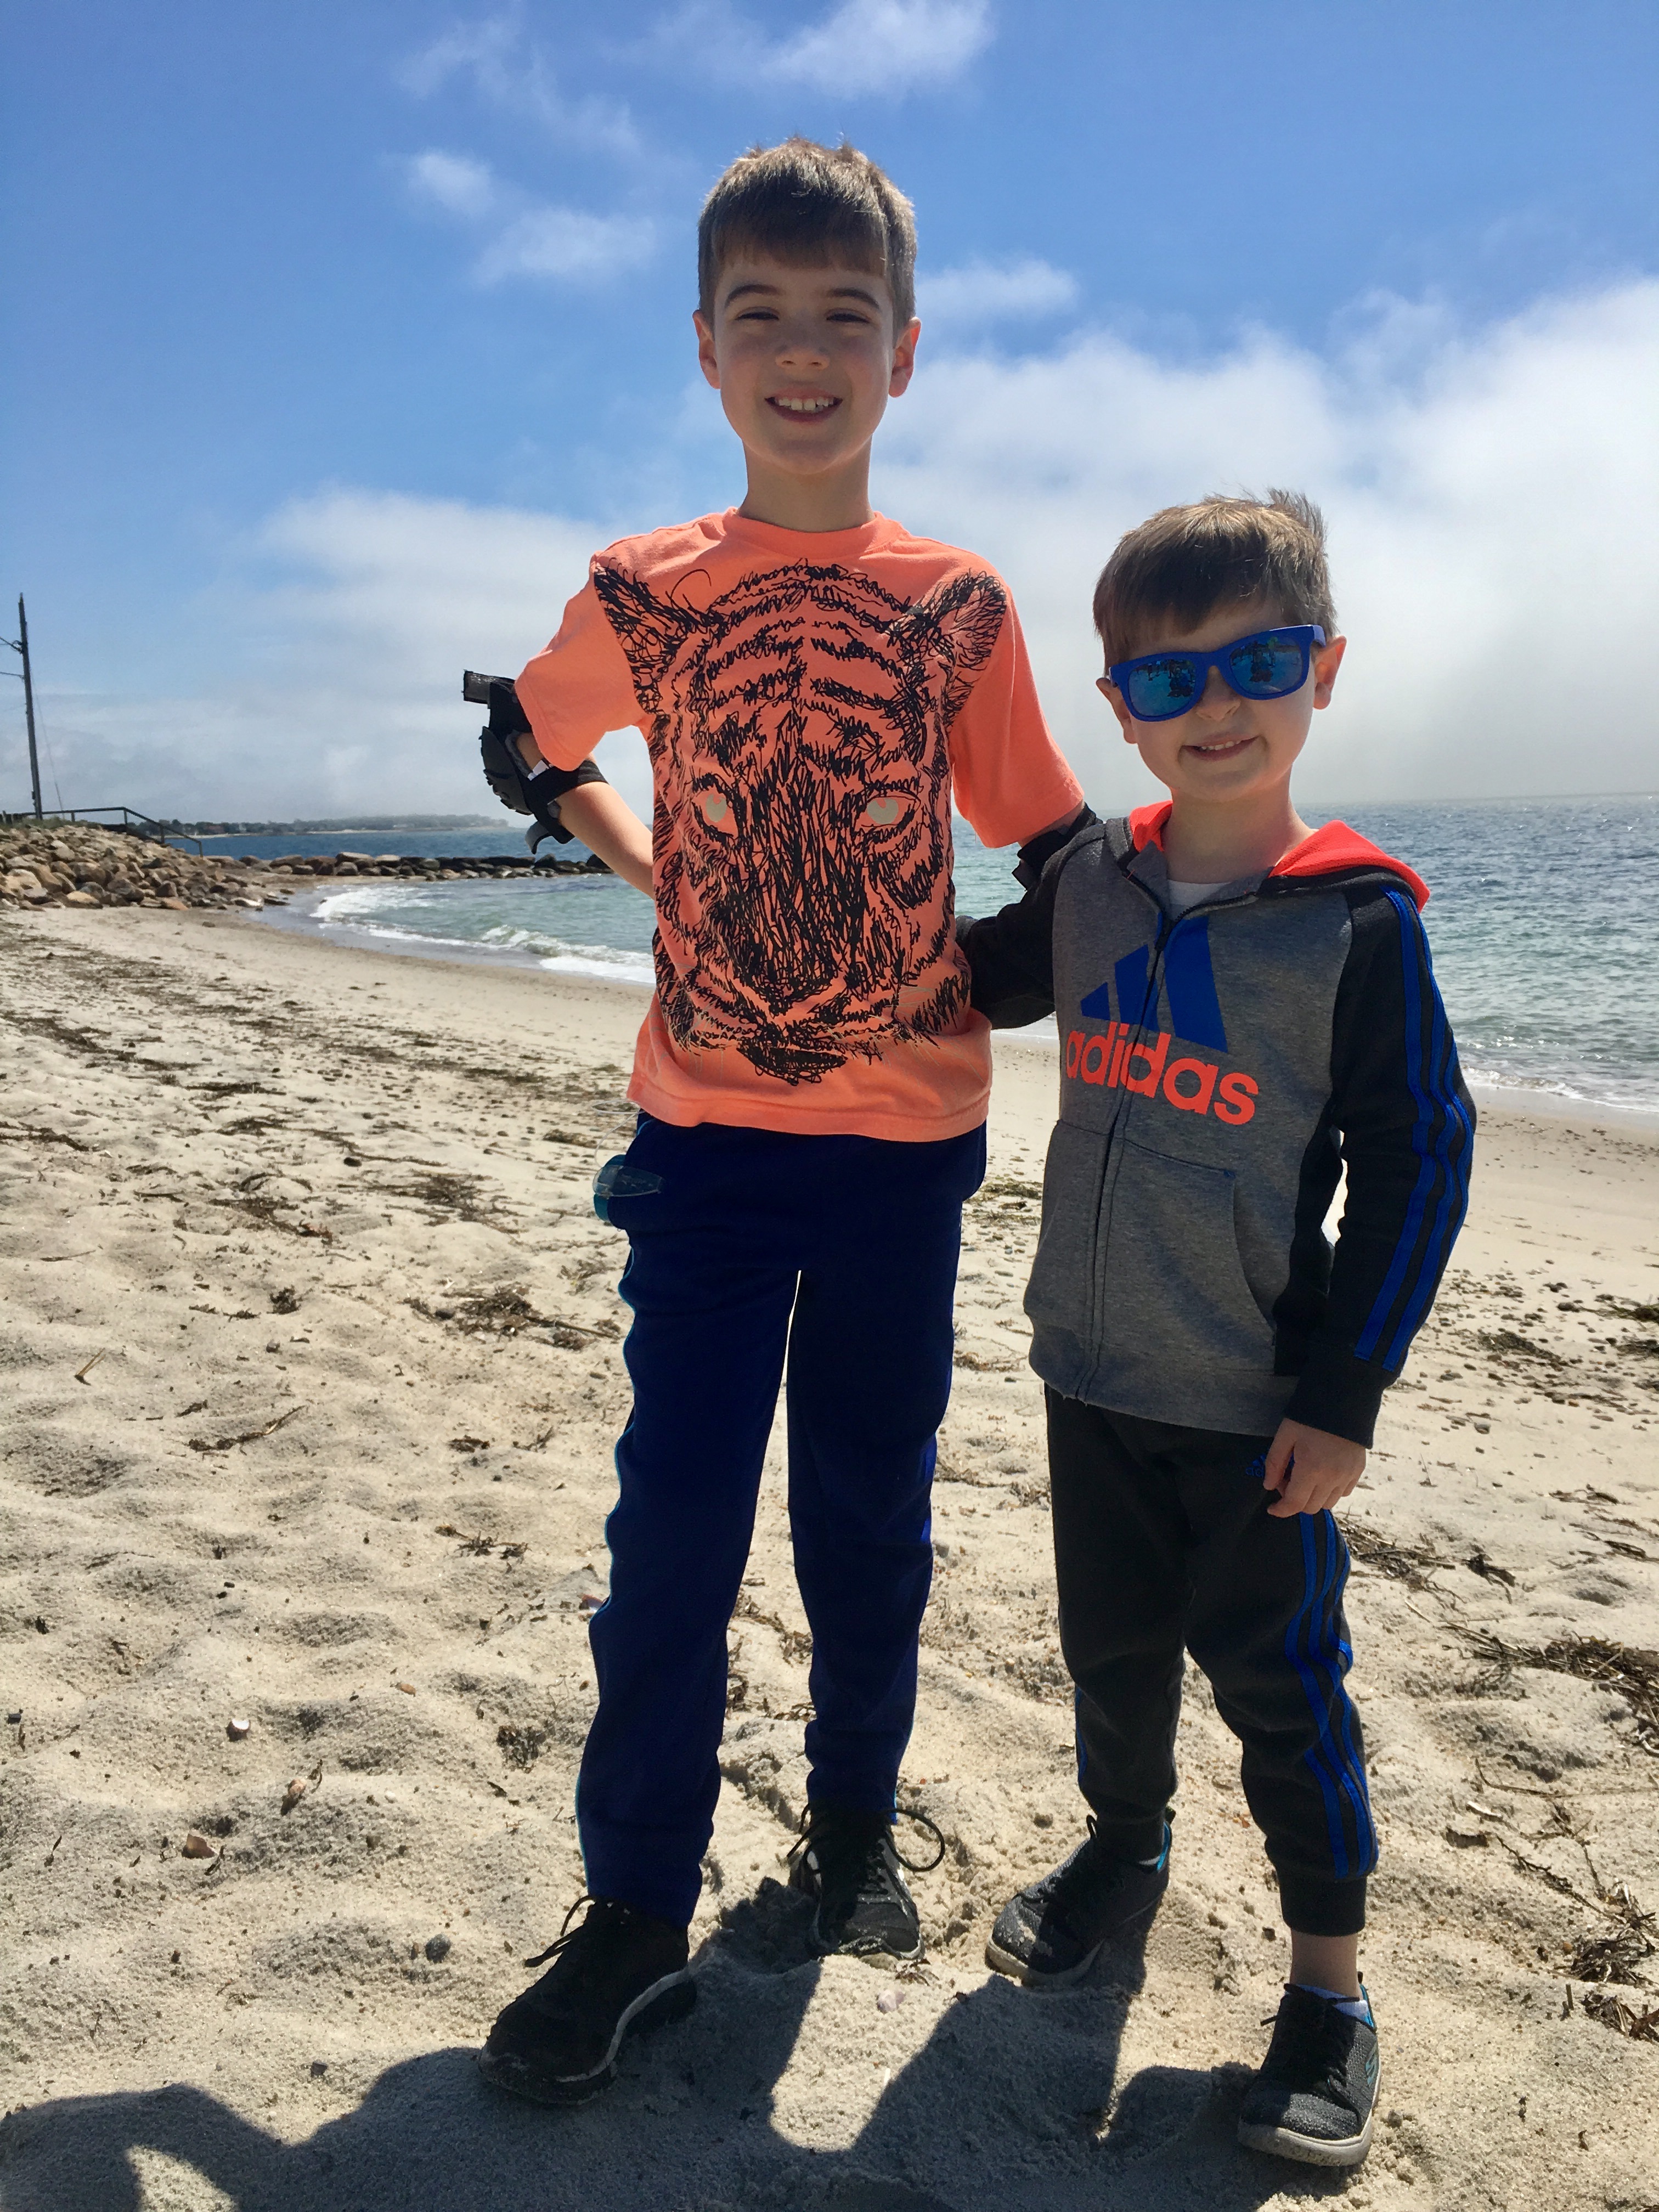 Having a Brother With Type 1 Diabetes Means Being Patient